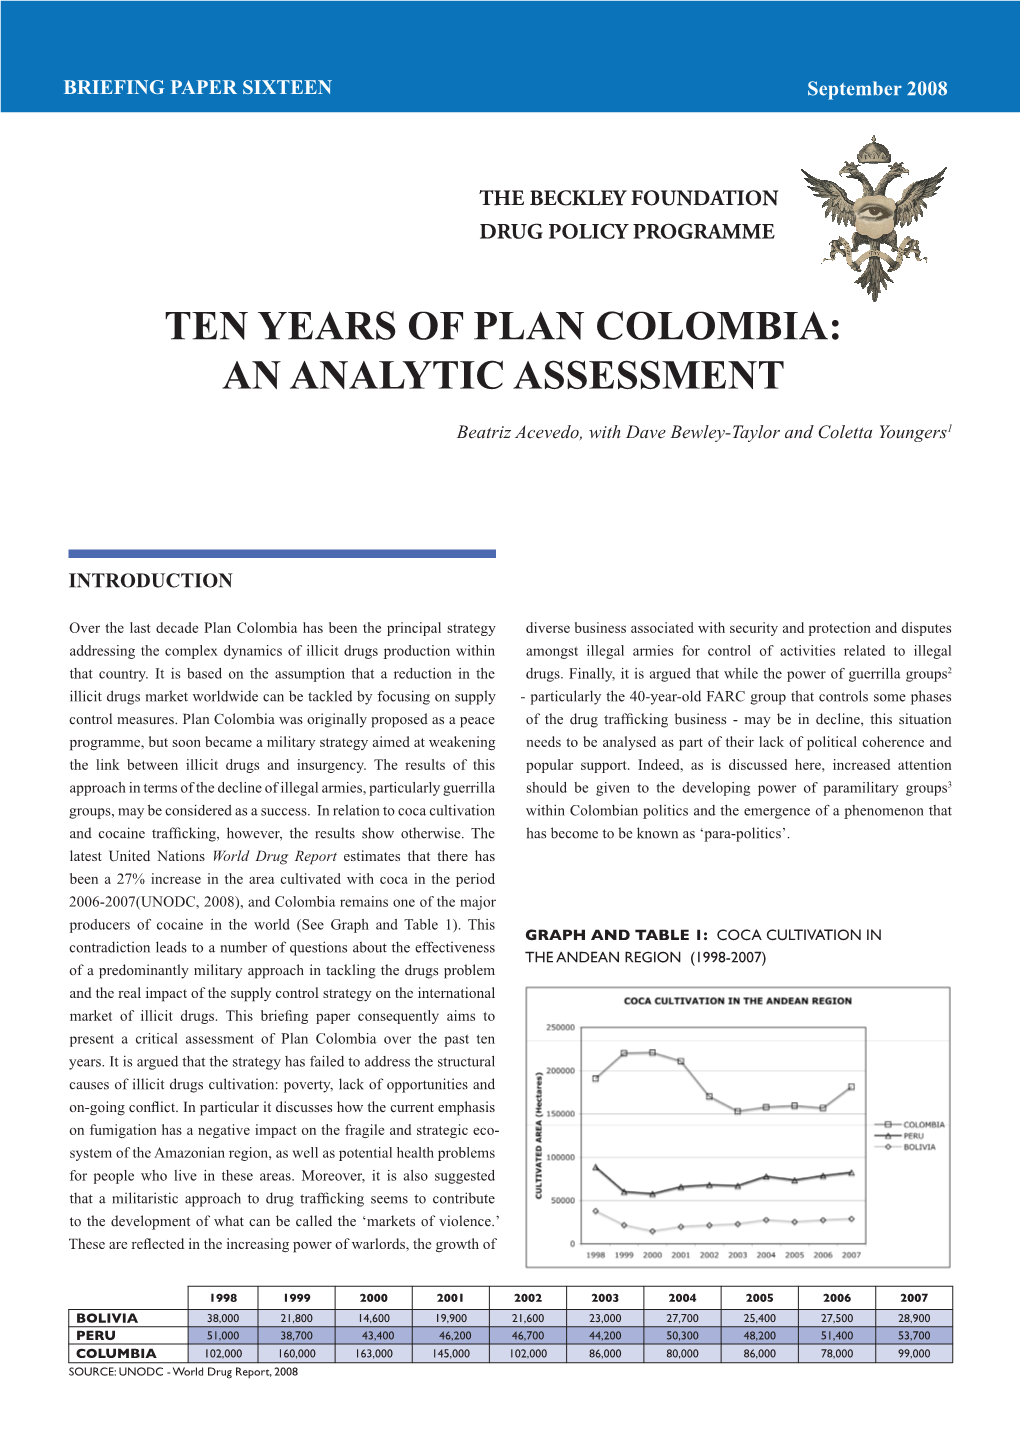 Ten Years of Plan Colombia: an Analytic Assessment